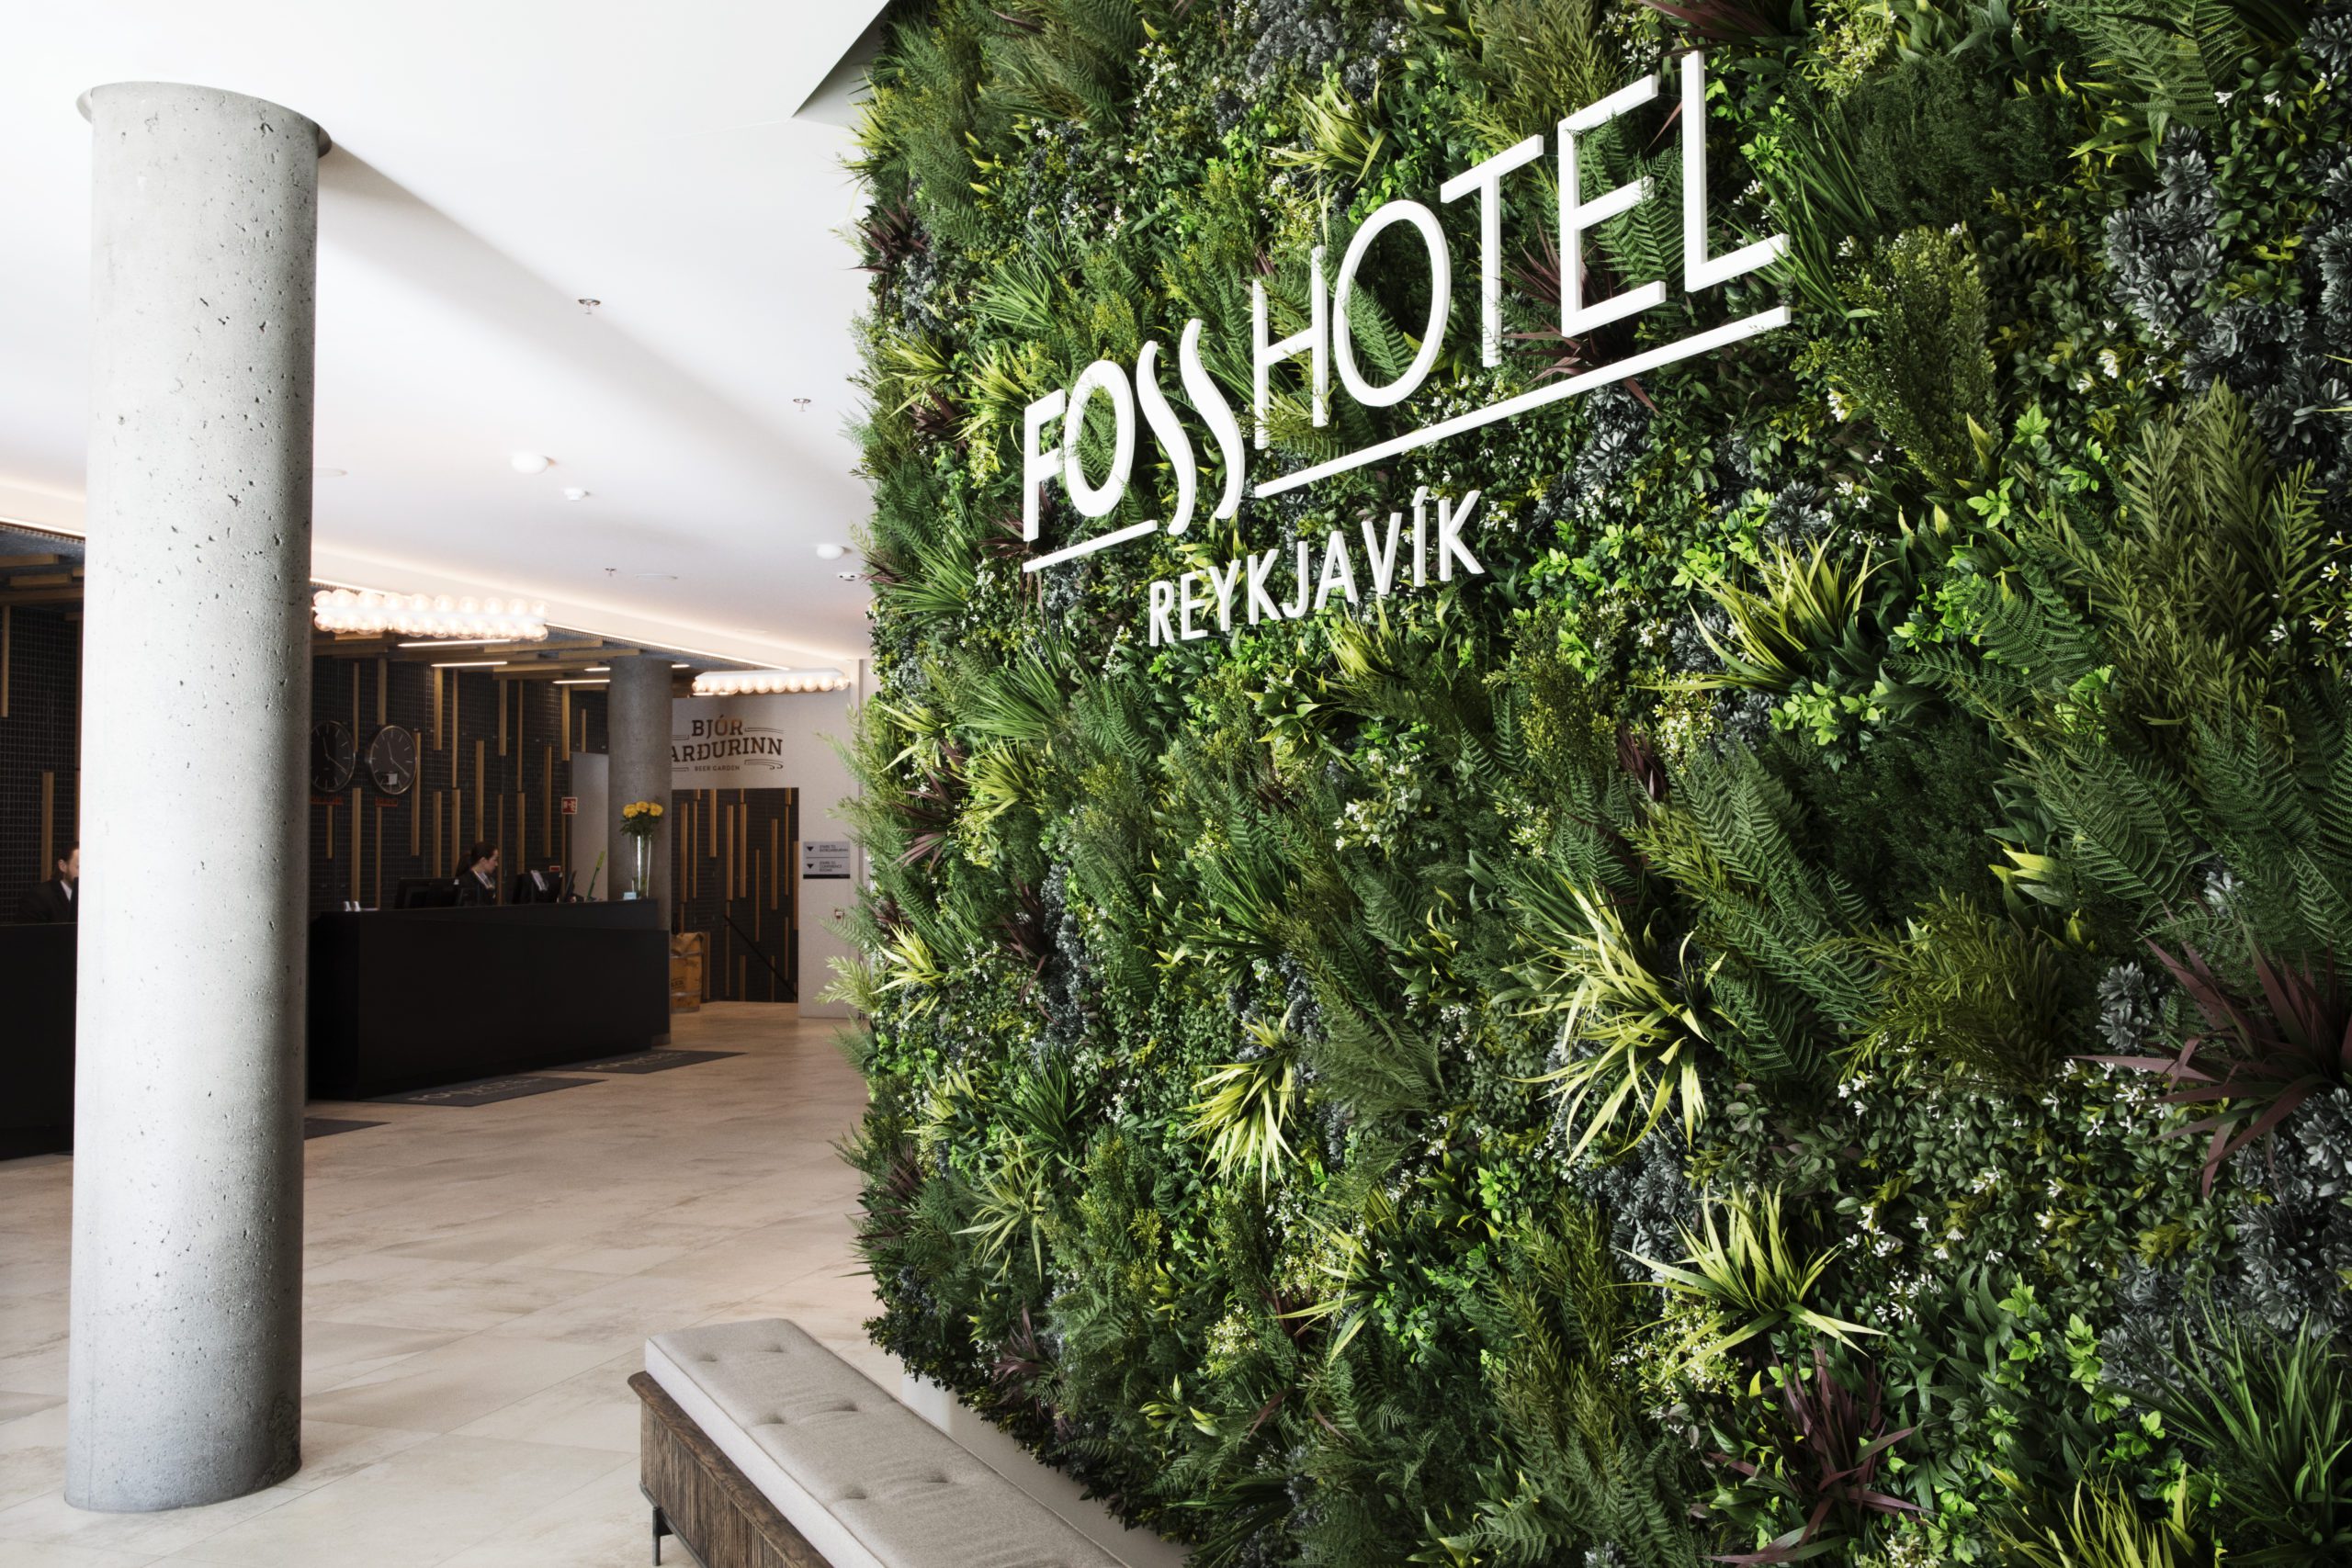 Artificial Green Wall in a Hotel Reception in Iceland